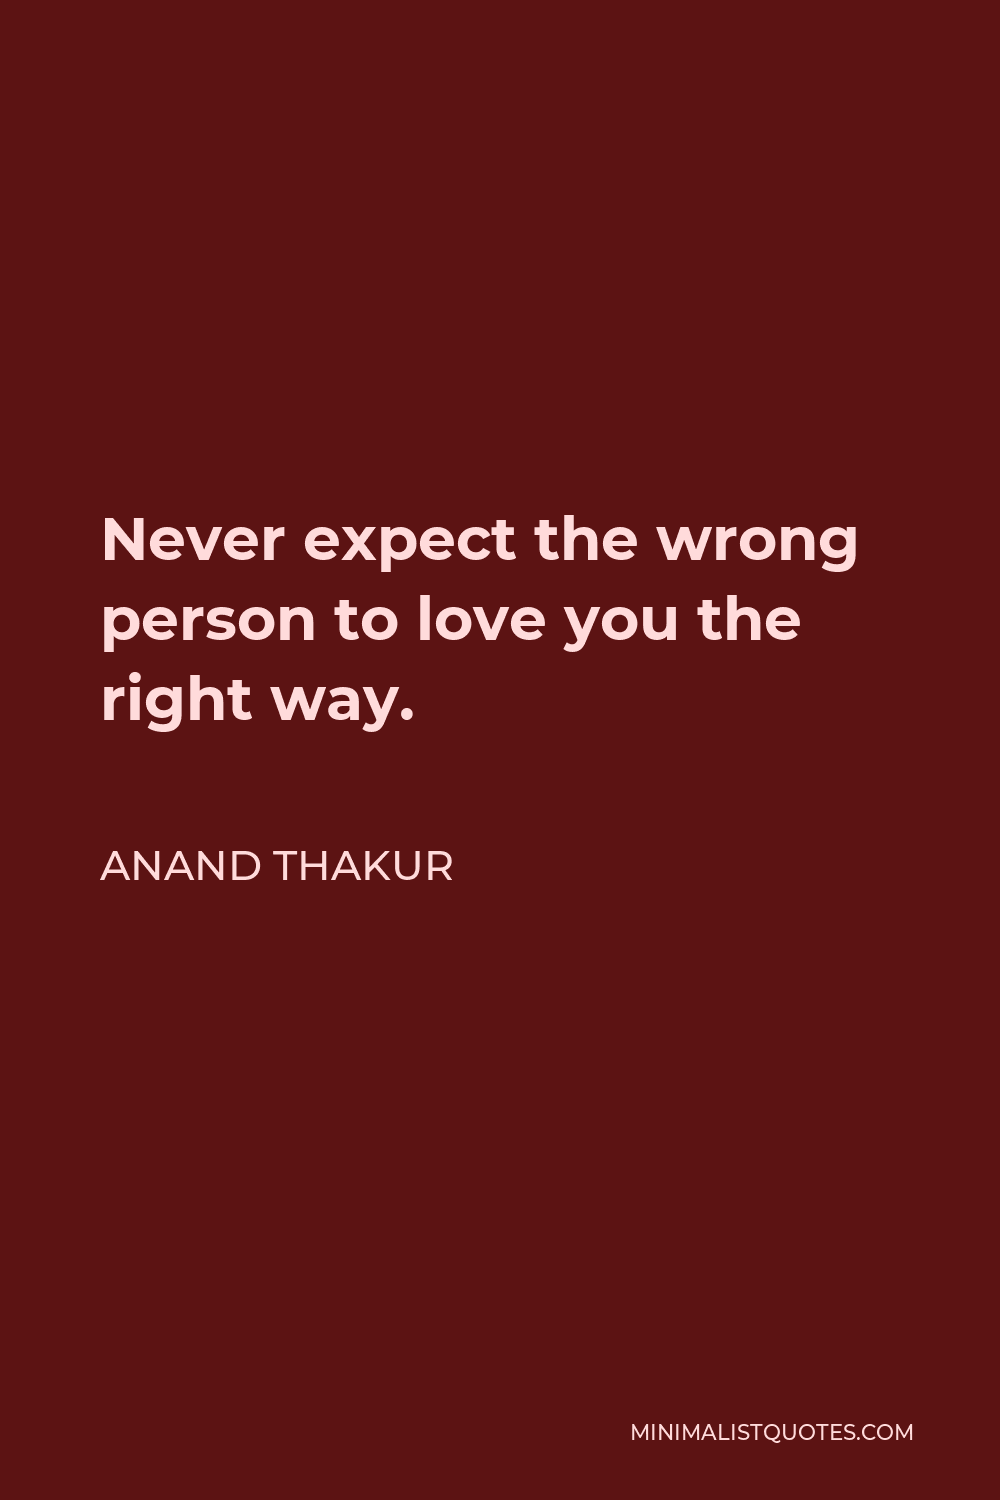 Anand Thakur Quote - Never expect the wrong person to love you the right way.